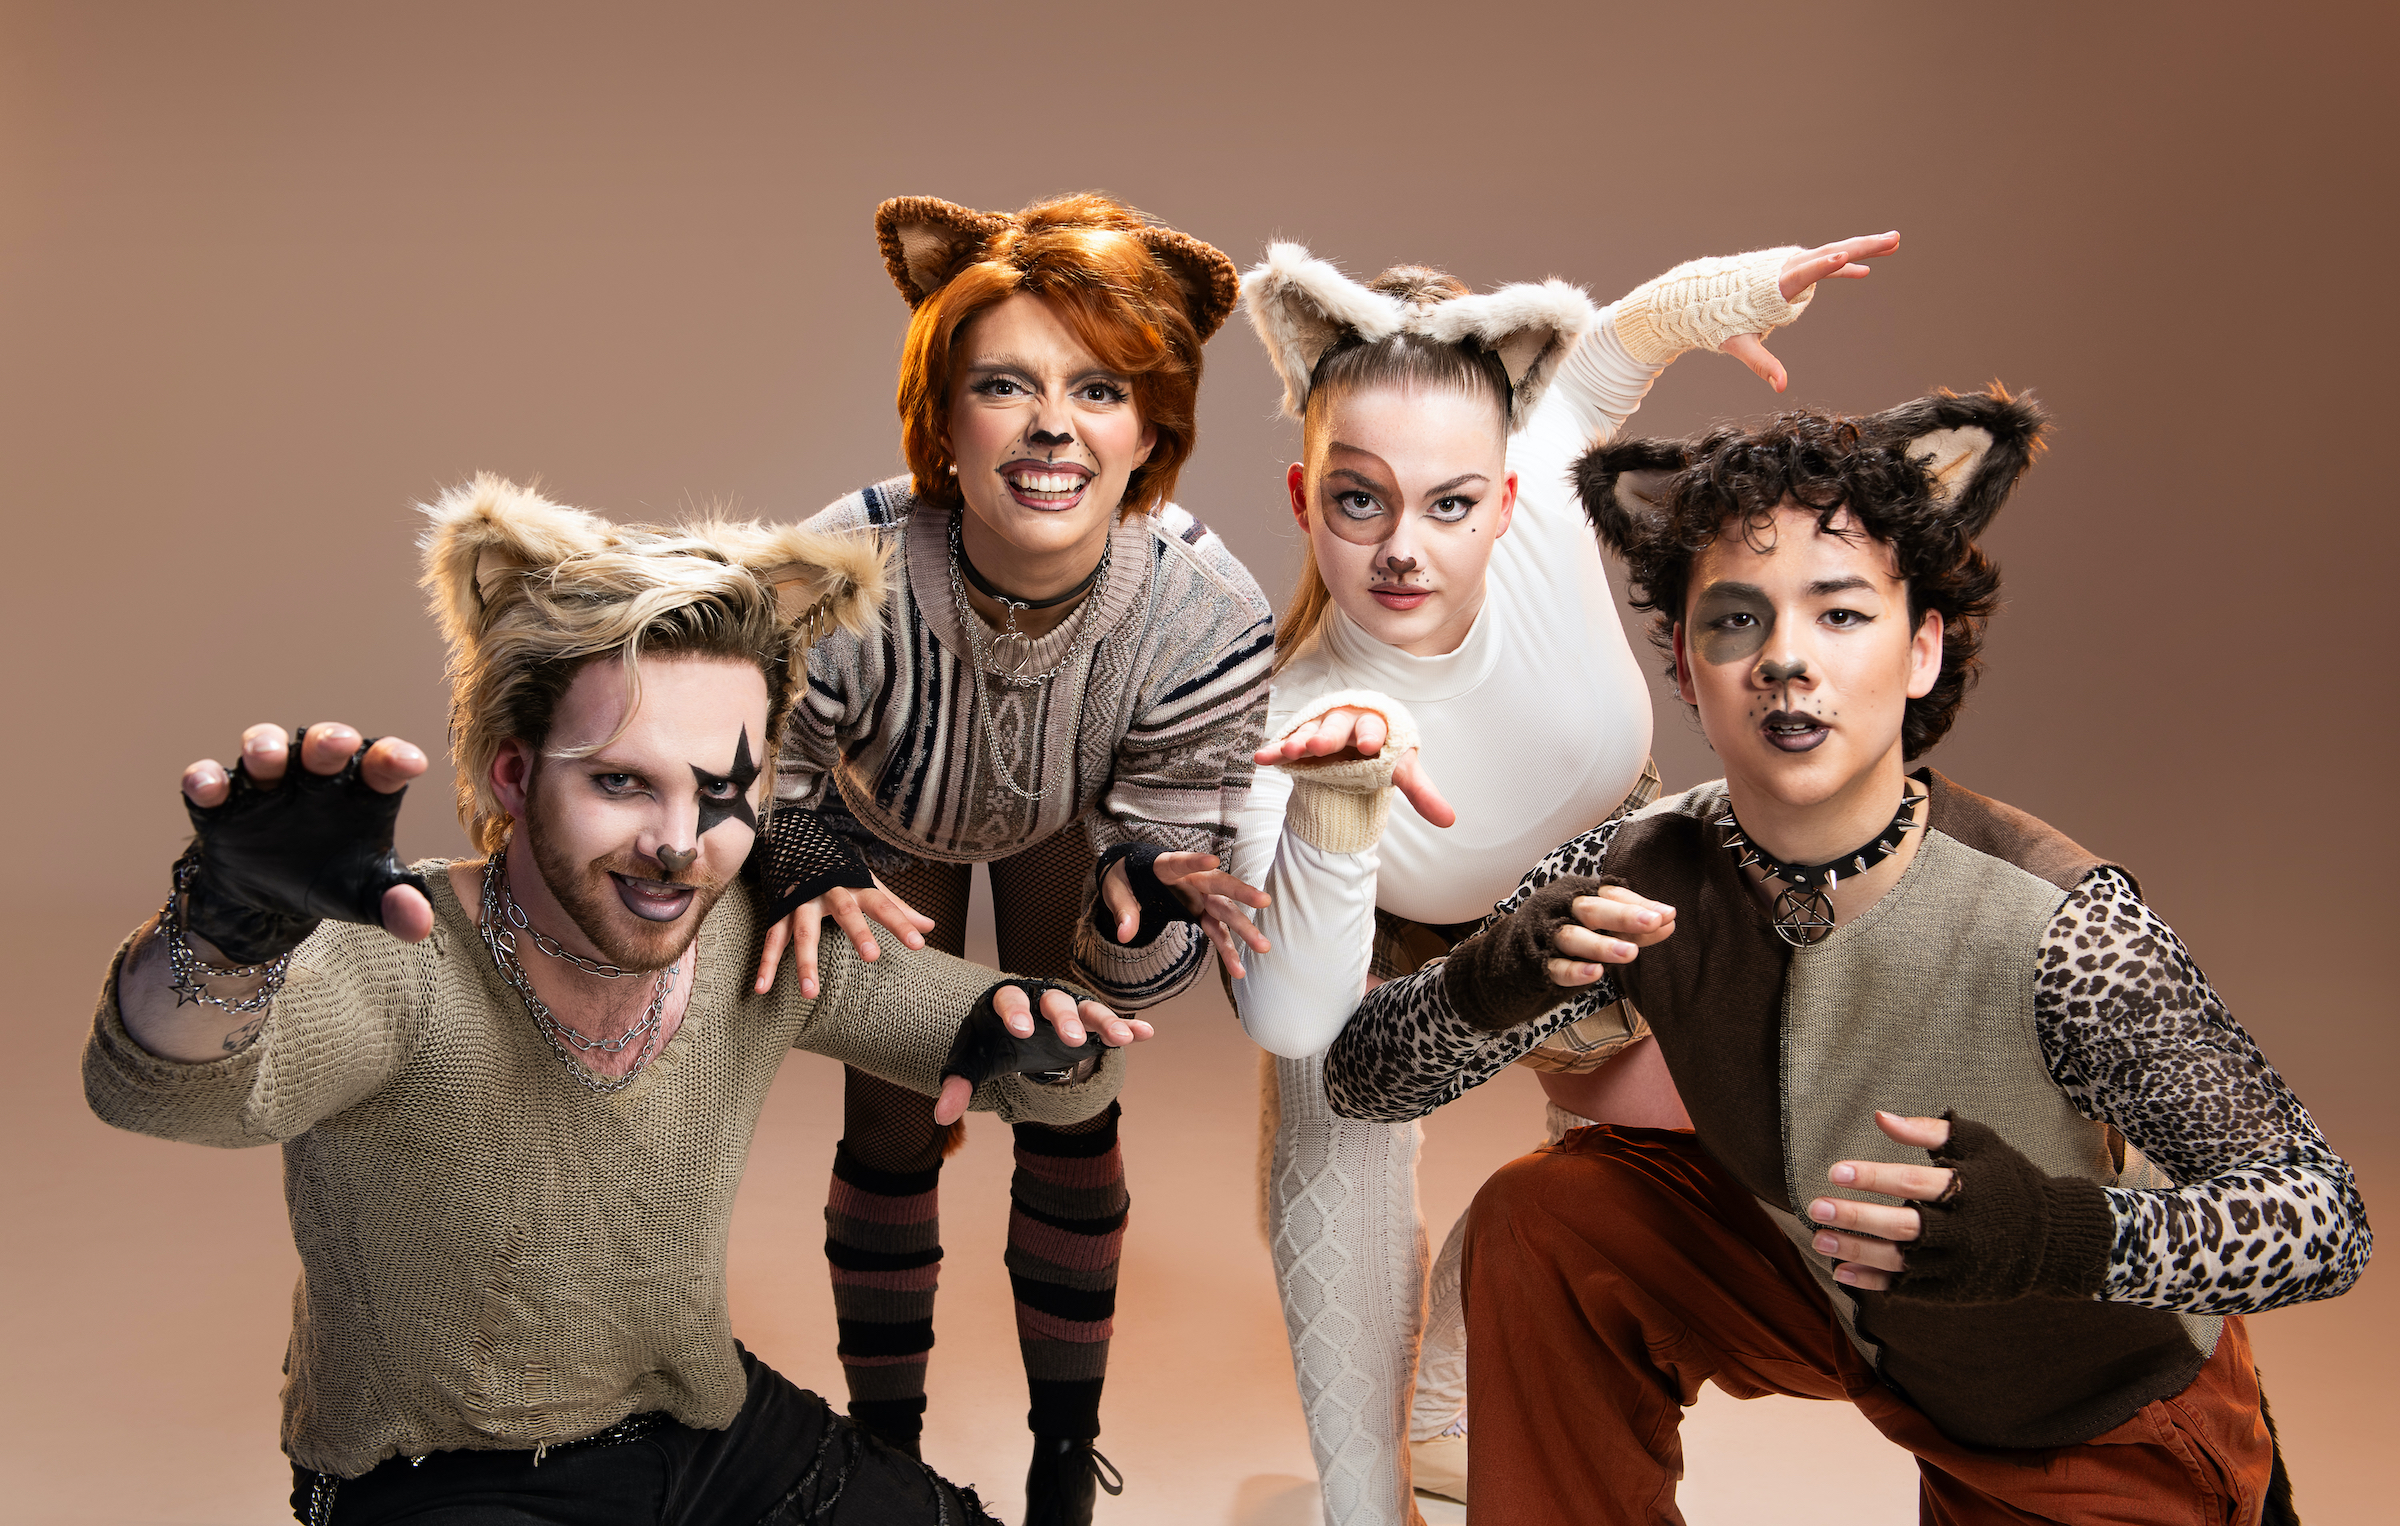 Four individuals wearing cat-like makeup with fluffy cat ears. Two on the outsides stand on one knee, while the two in the middle are slightly crouched. All four have their arms bent and posed as if they are pouncing at the camera.